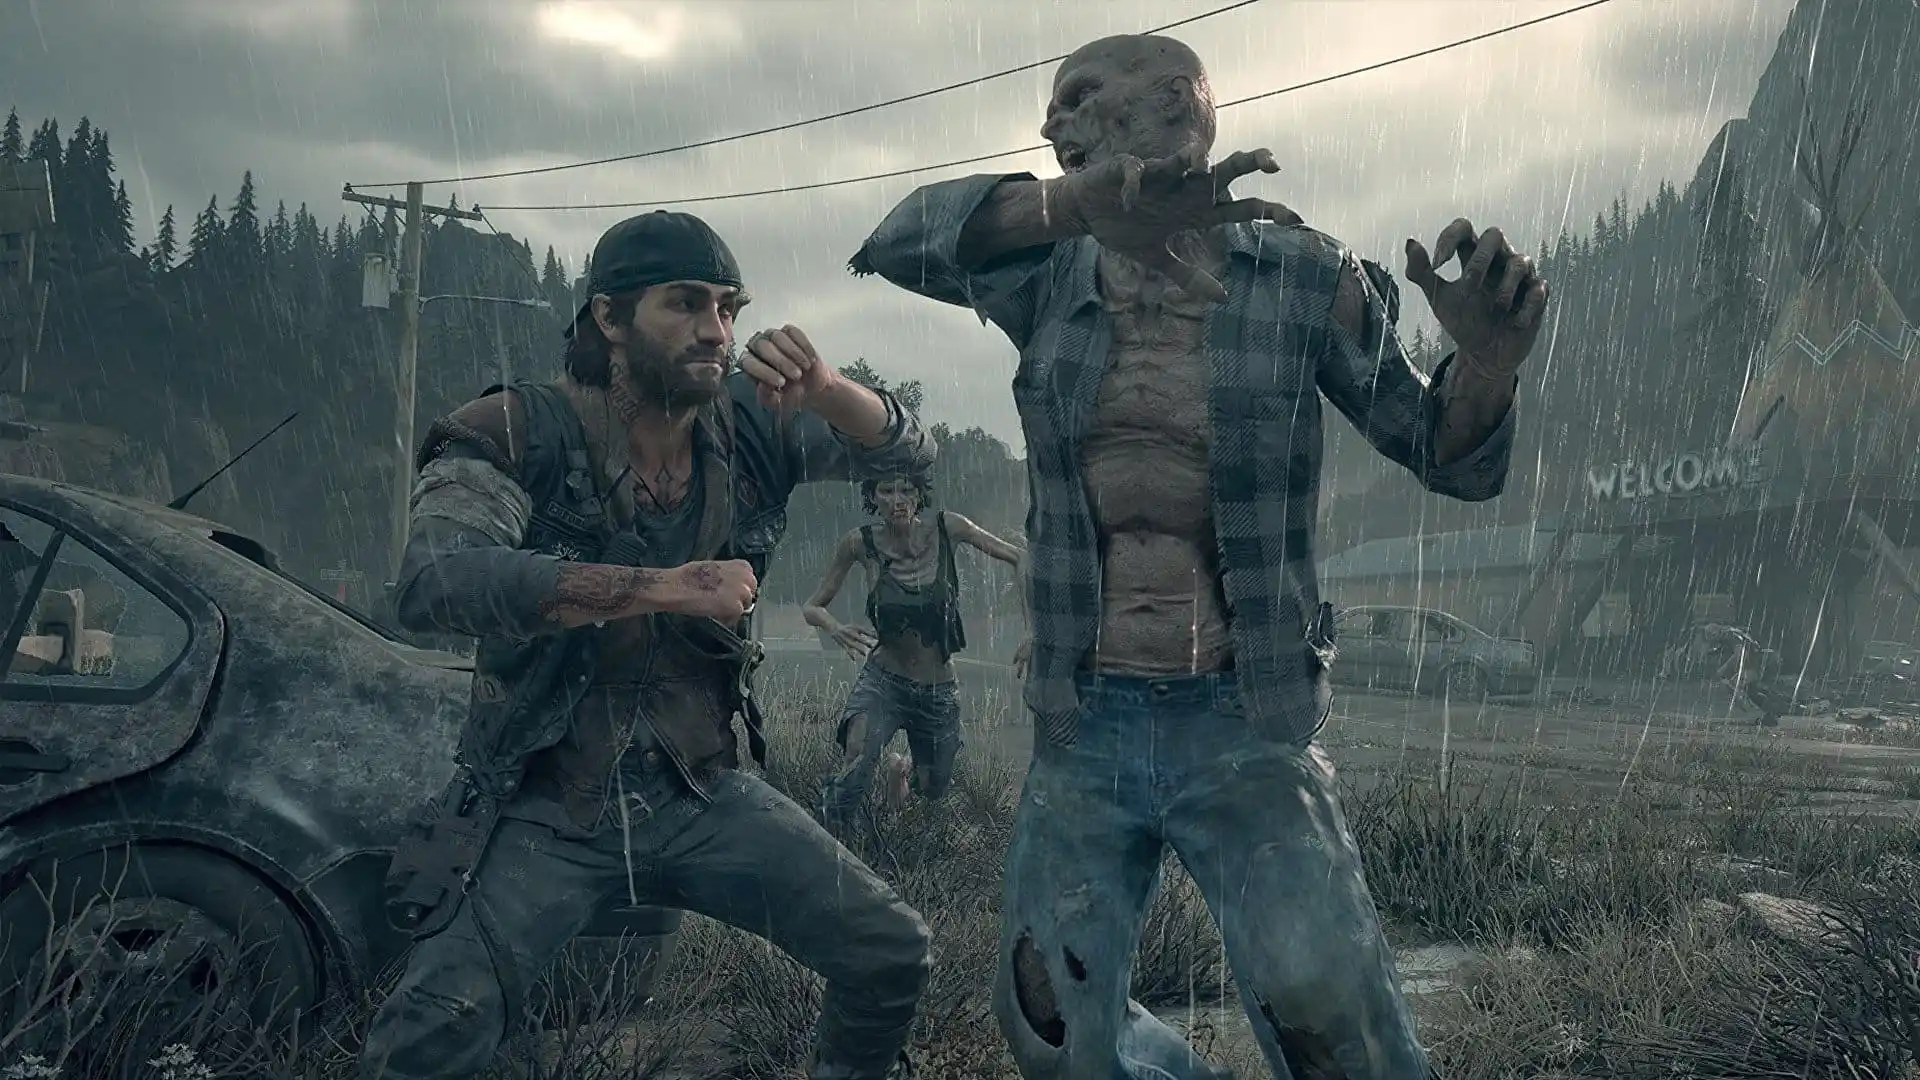 Sony Bend Days Gone sells itself as the opposite of itself to entice players, a challenge for marketing